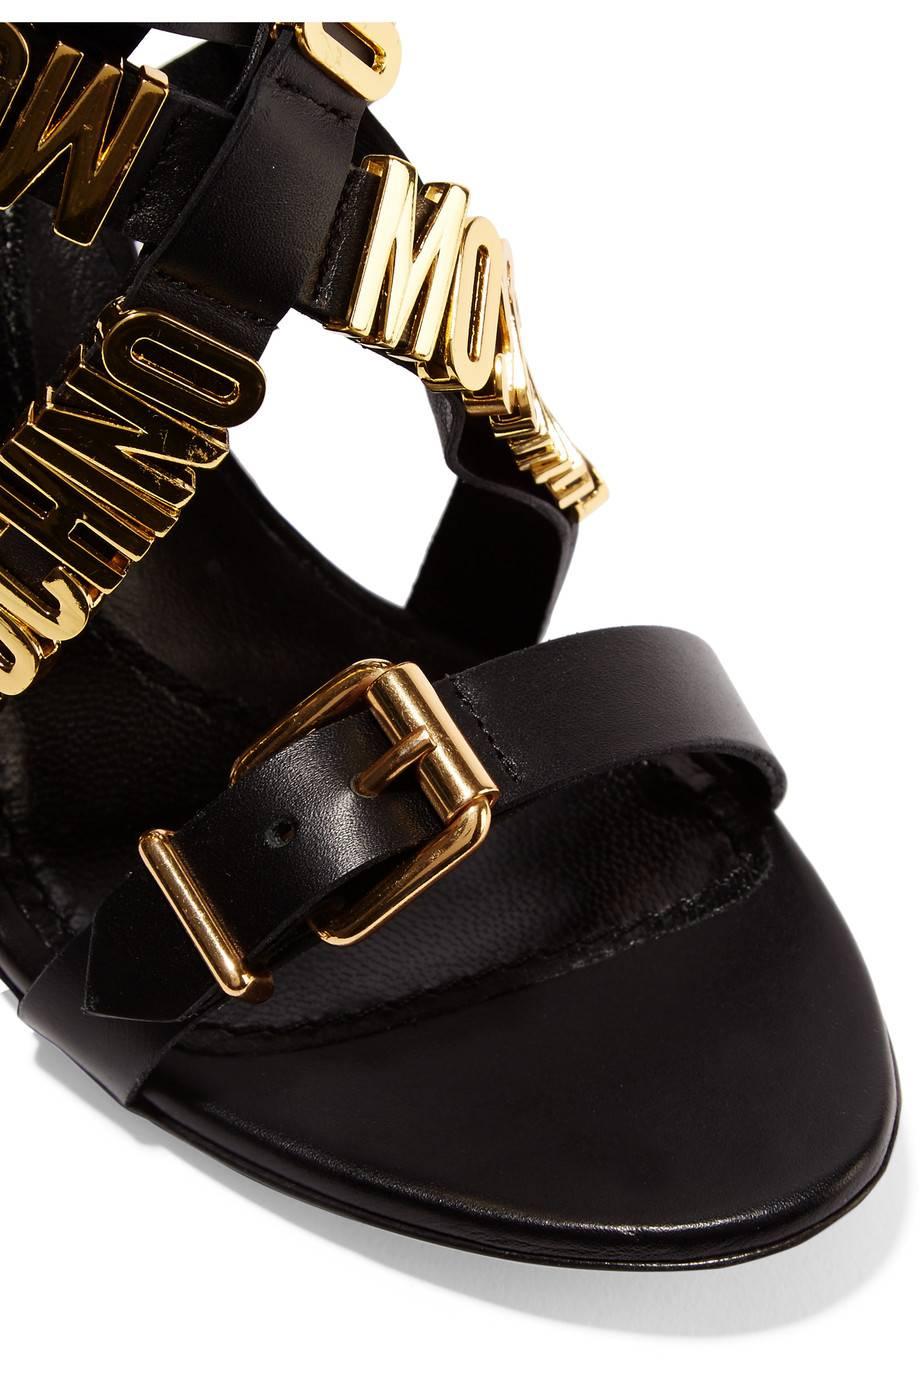 CURATOR'S NOTES

Let your feet do the talking with these brand NEW and SOLD OUT Moschino black leather sandals featuring gold plated 